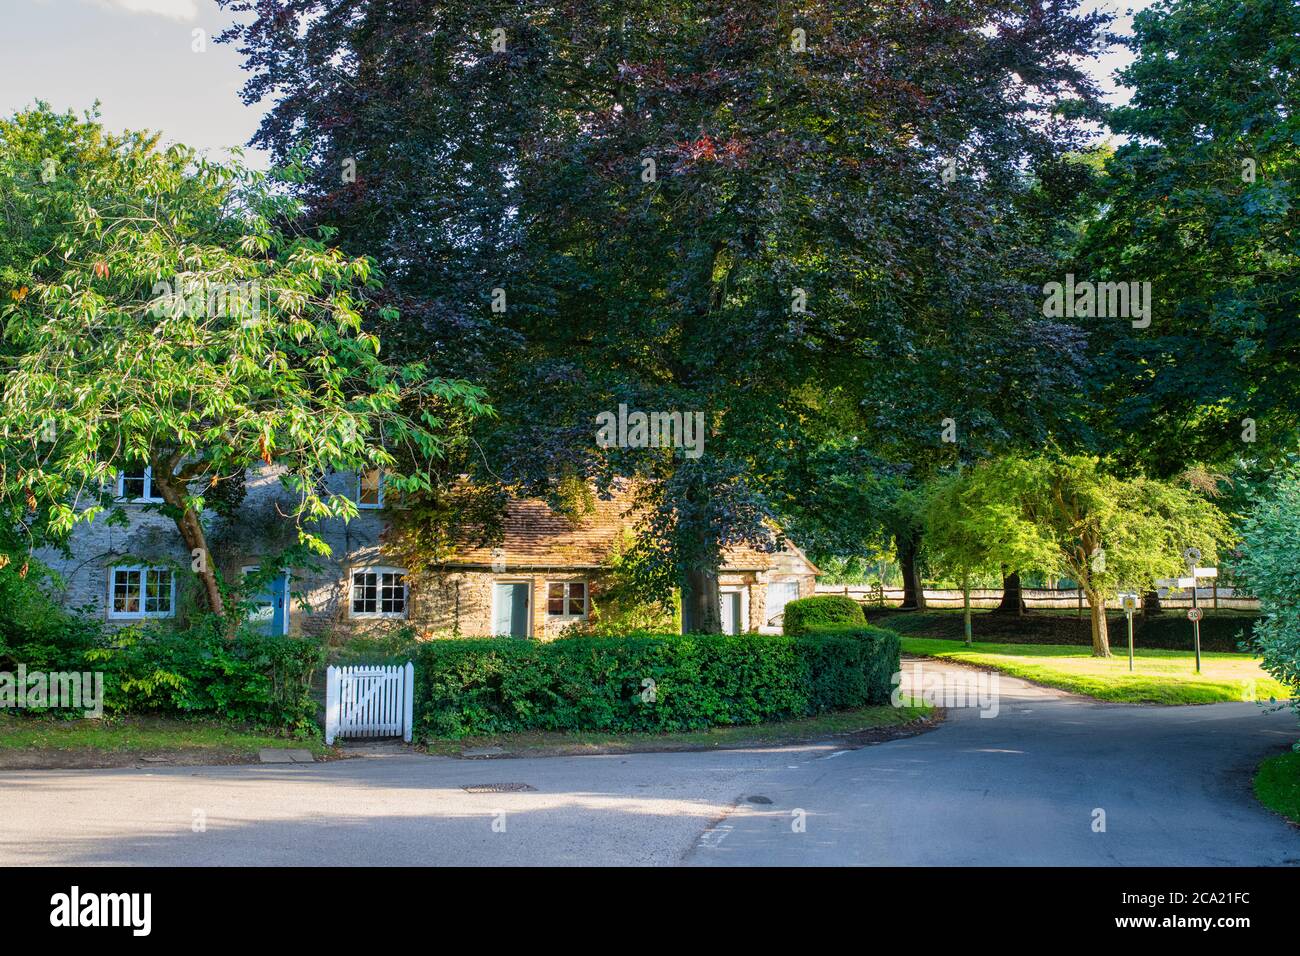 Cottage through trees in the village of Little Haseley, Oxfordshire, England Stock Photo